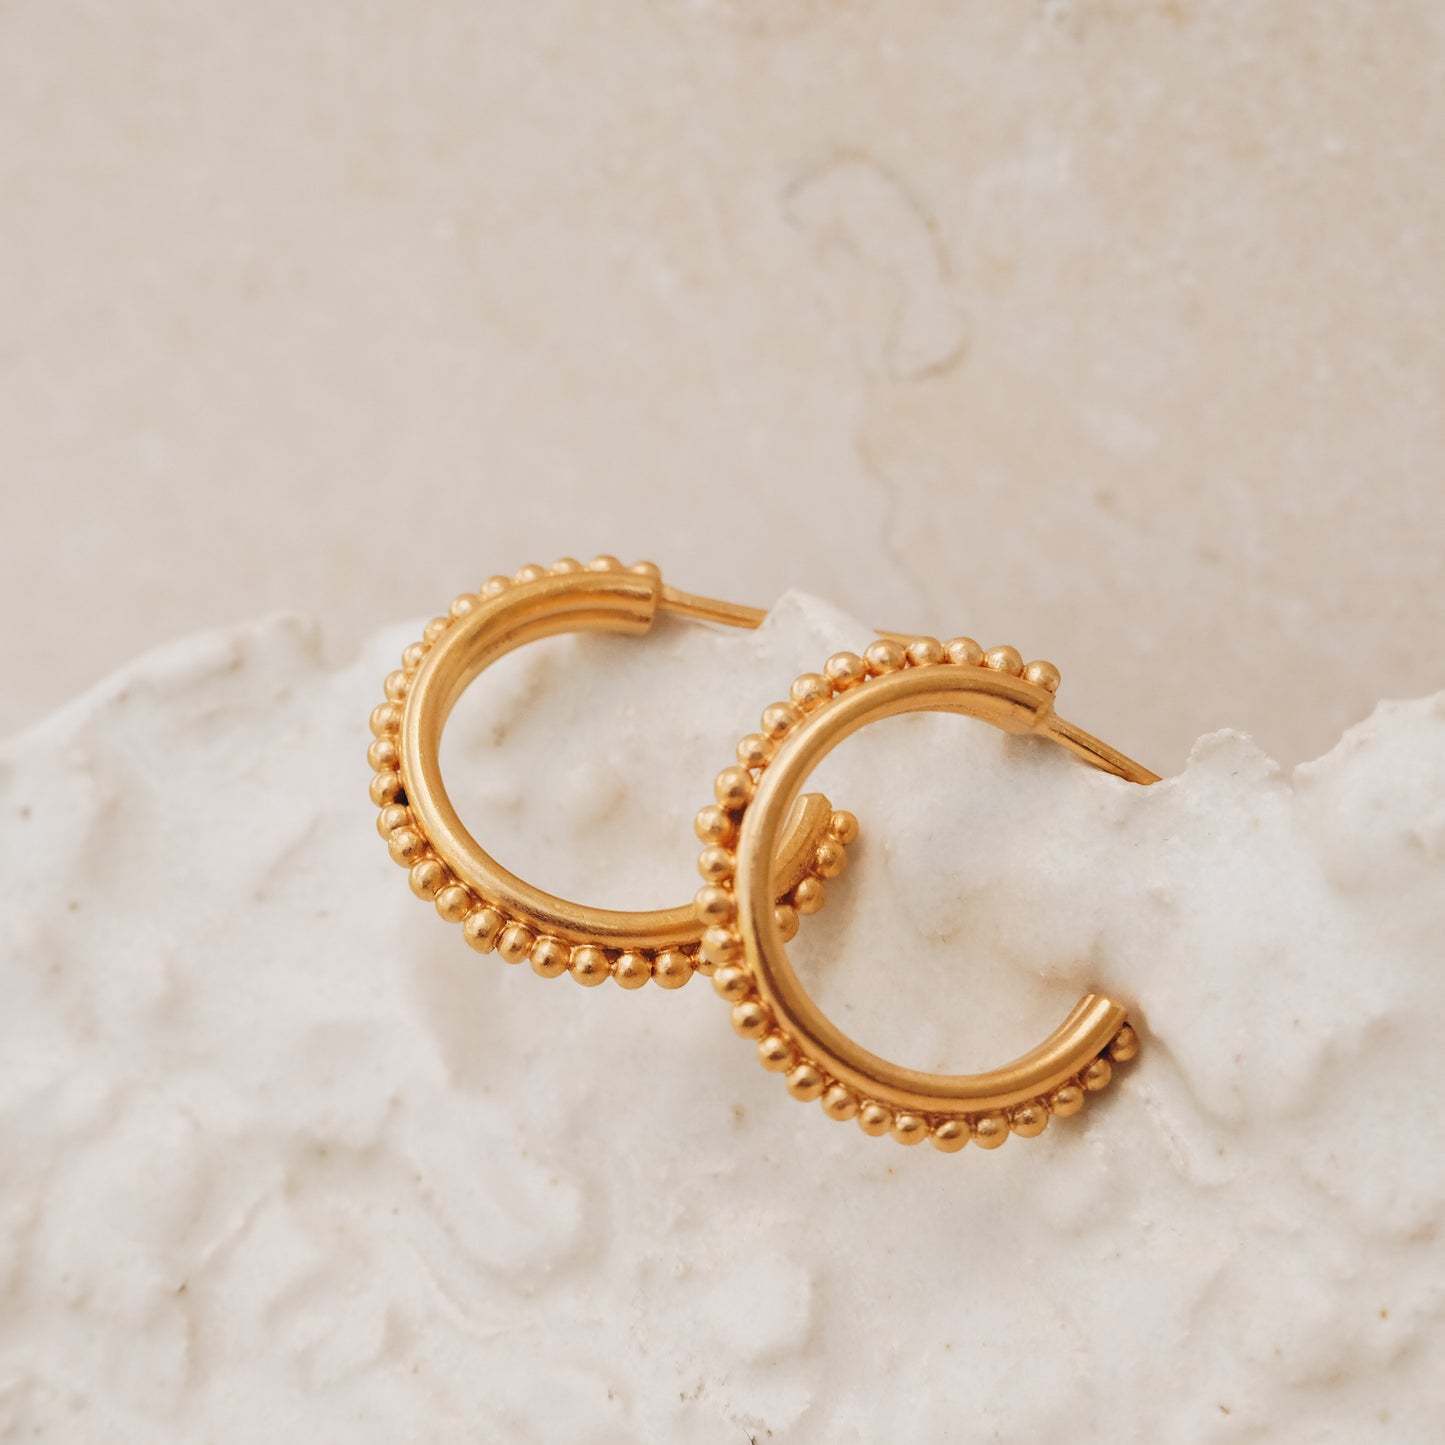 Handcrafted gold stud hoop earrings with delicate granulation, reminiscent of ancient treasures.